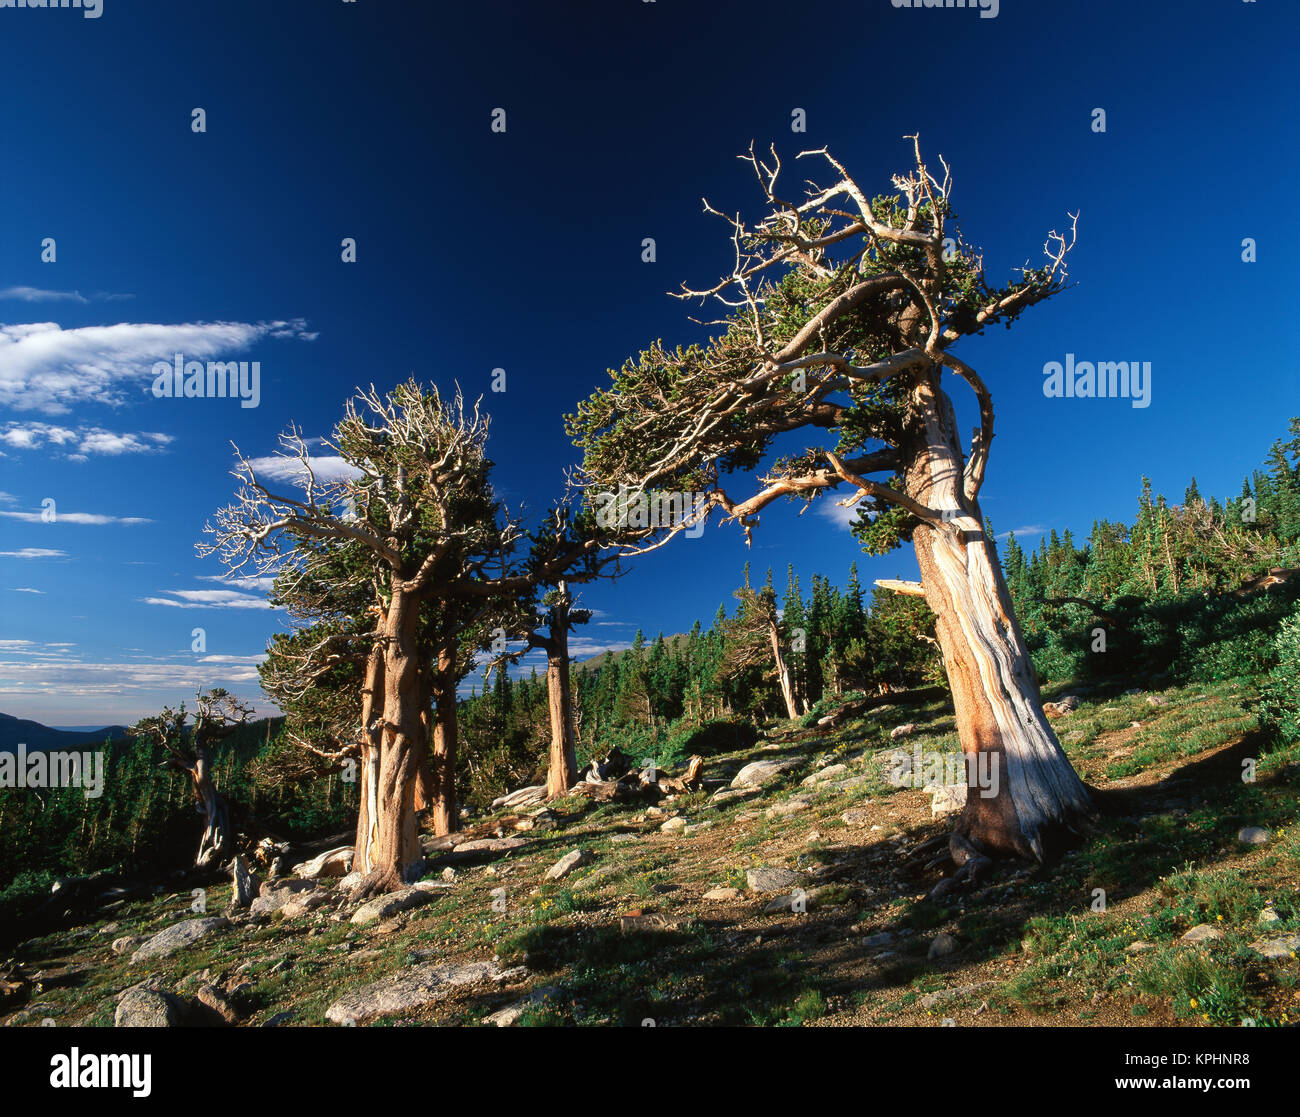 USA, Colorado, Arapaho National Forest, View of Bristlecone Pines (Pinus aristata) (Large format sizes available) Stock Photo